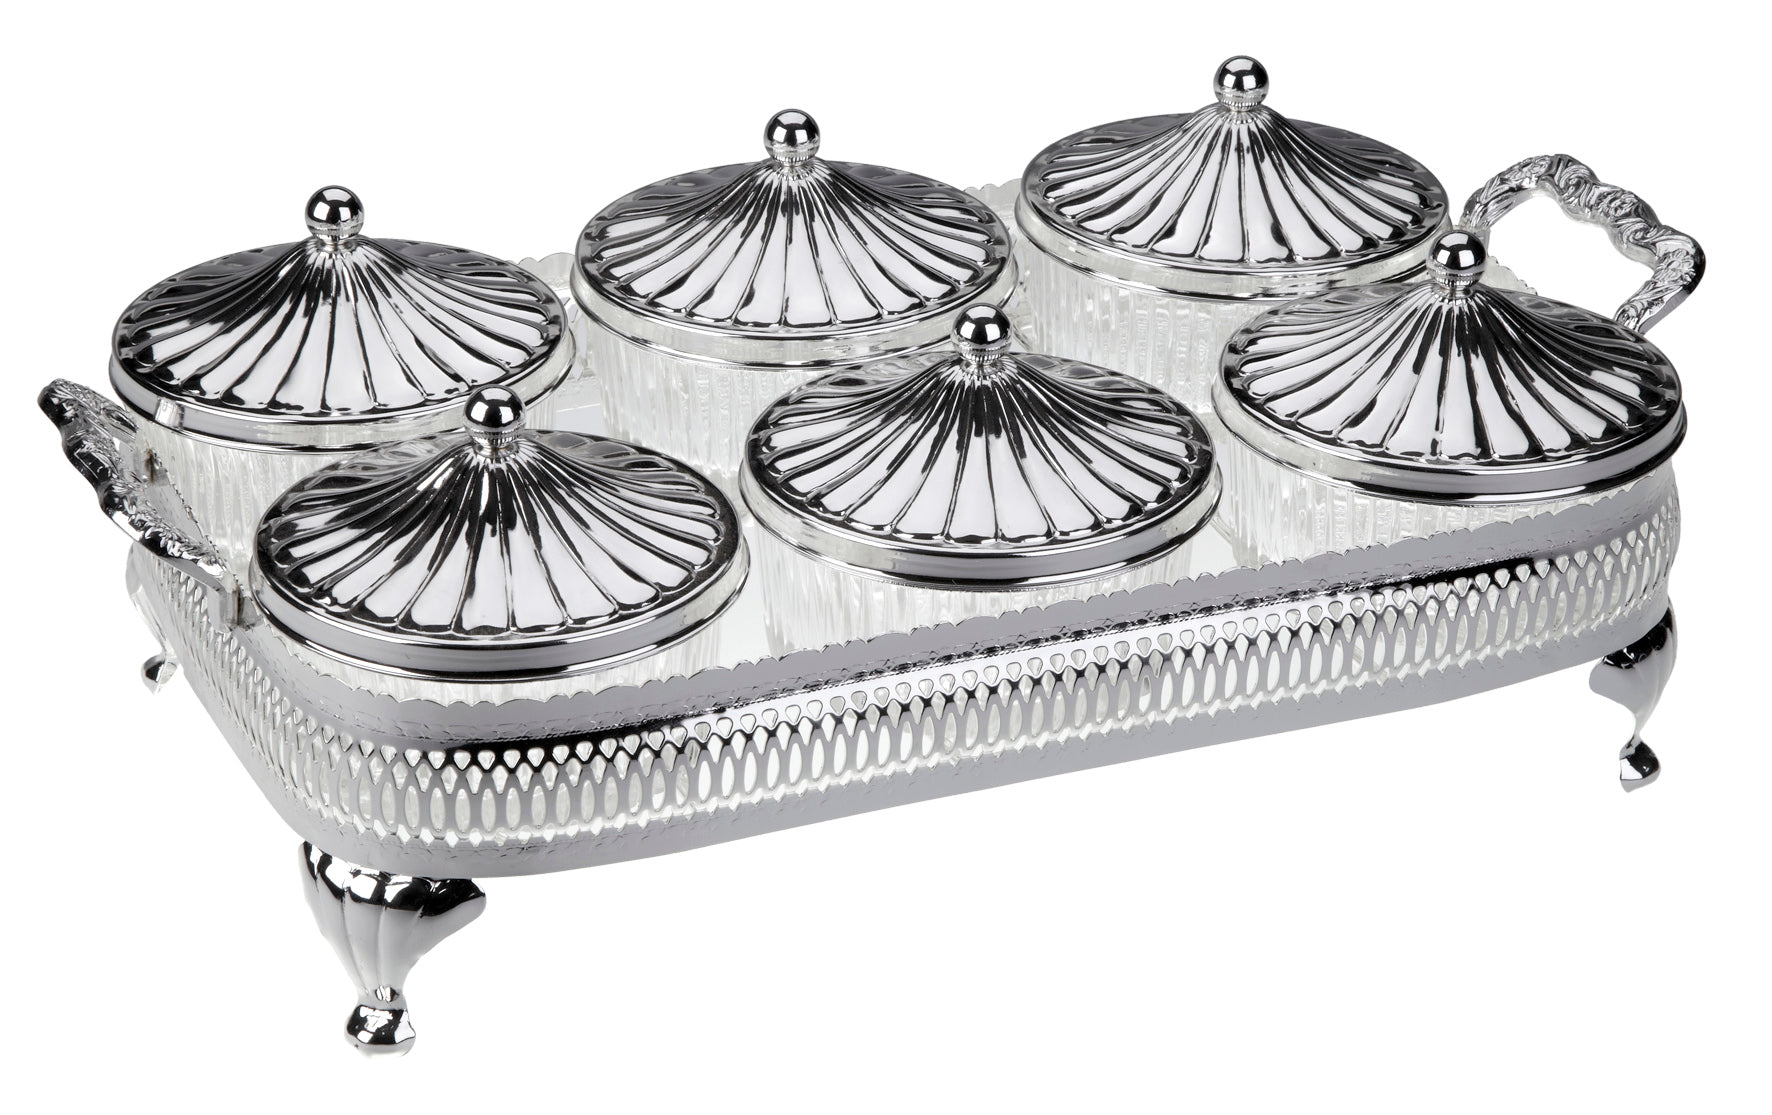 Queen Anne Round Bowl Set, 6 Pieces -37.5x20.5cm -Silver Plated